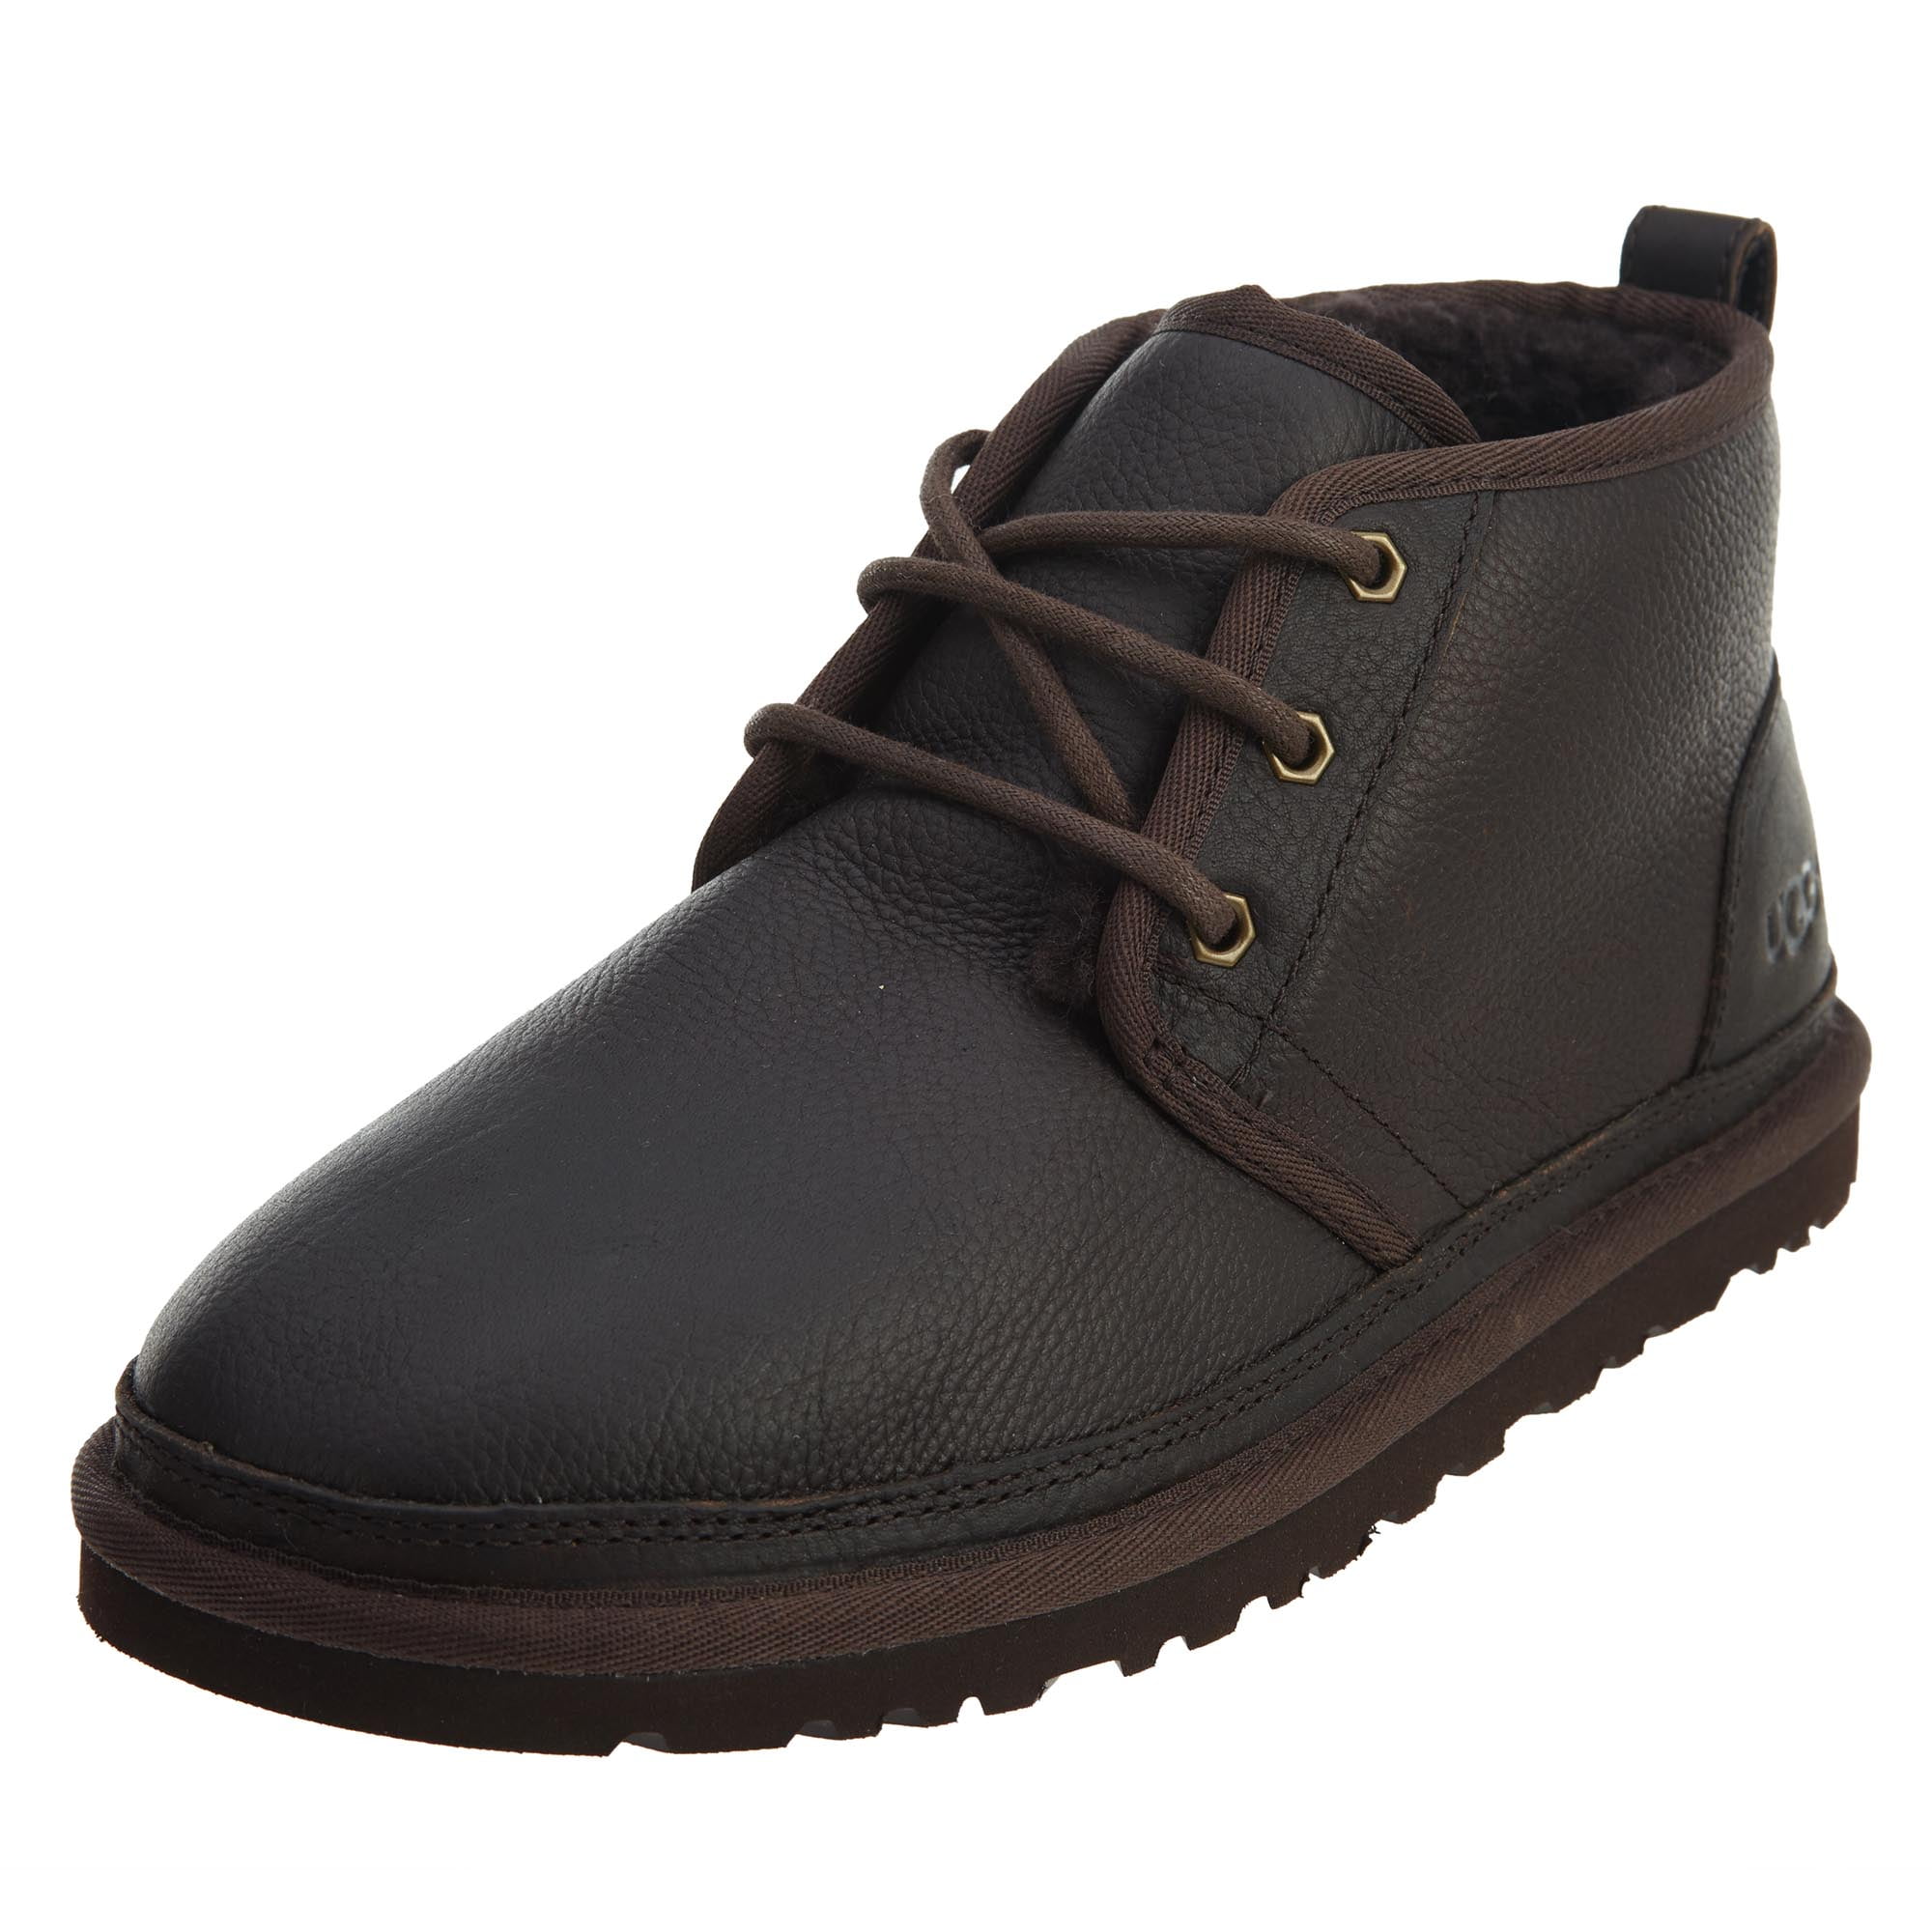 undisclosed ugg neumel china tea brown leather black chestnut gray suede men mid top boot